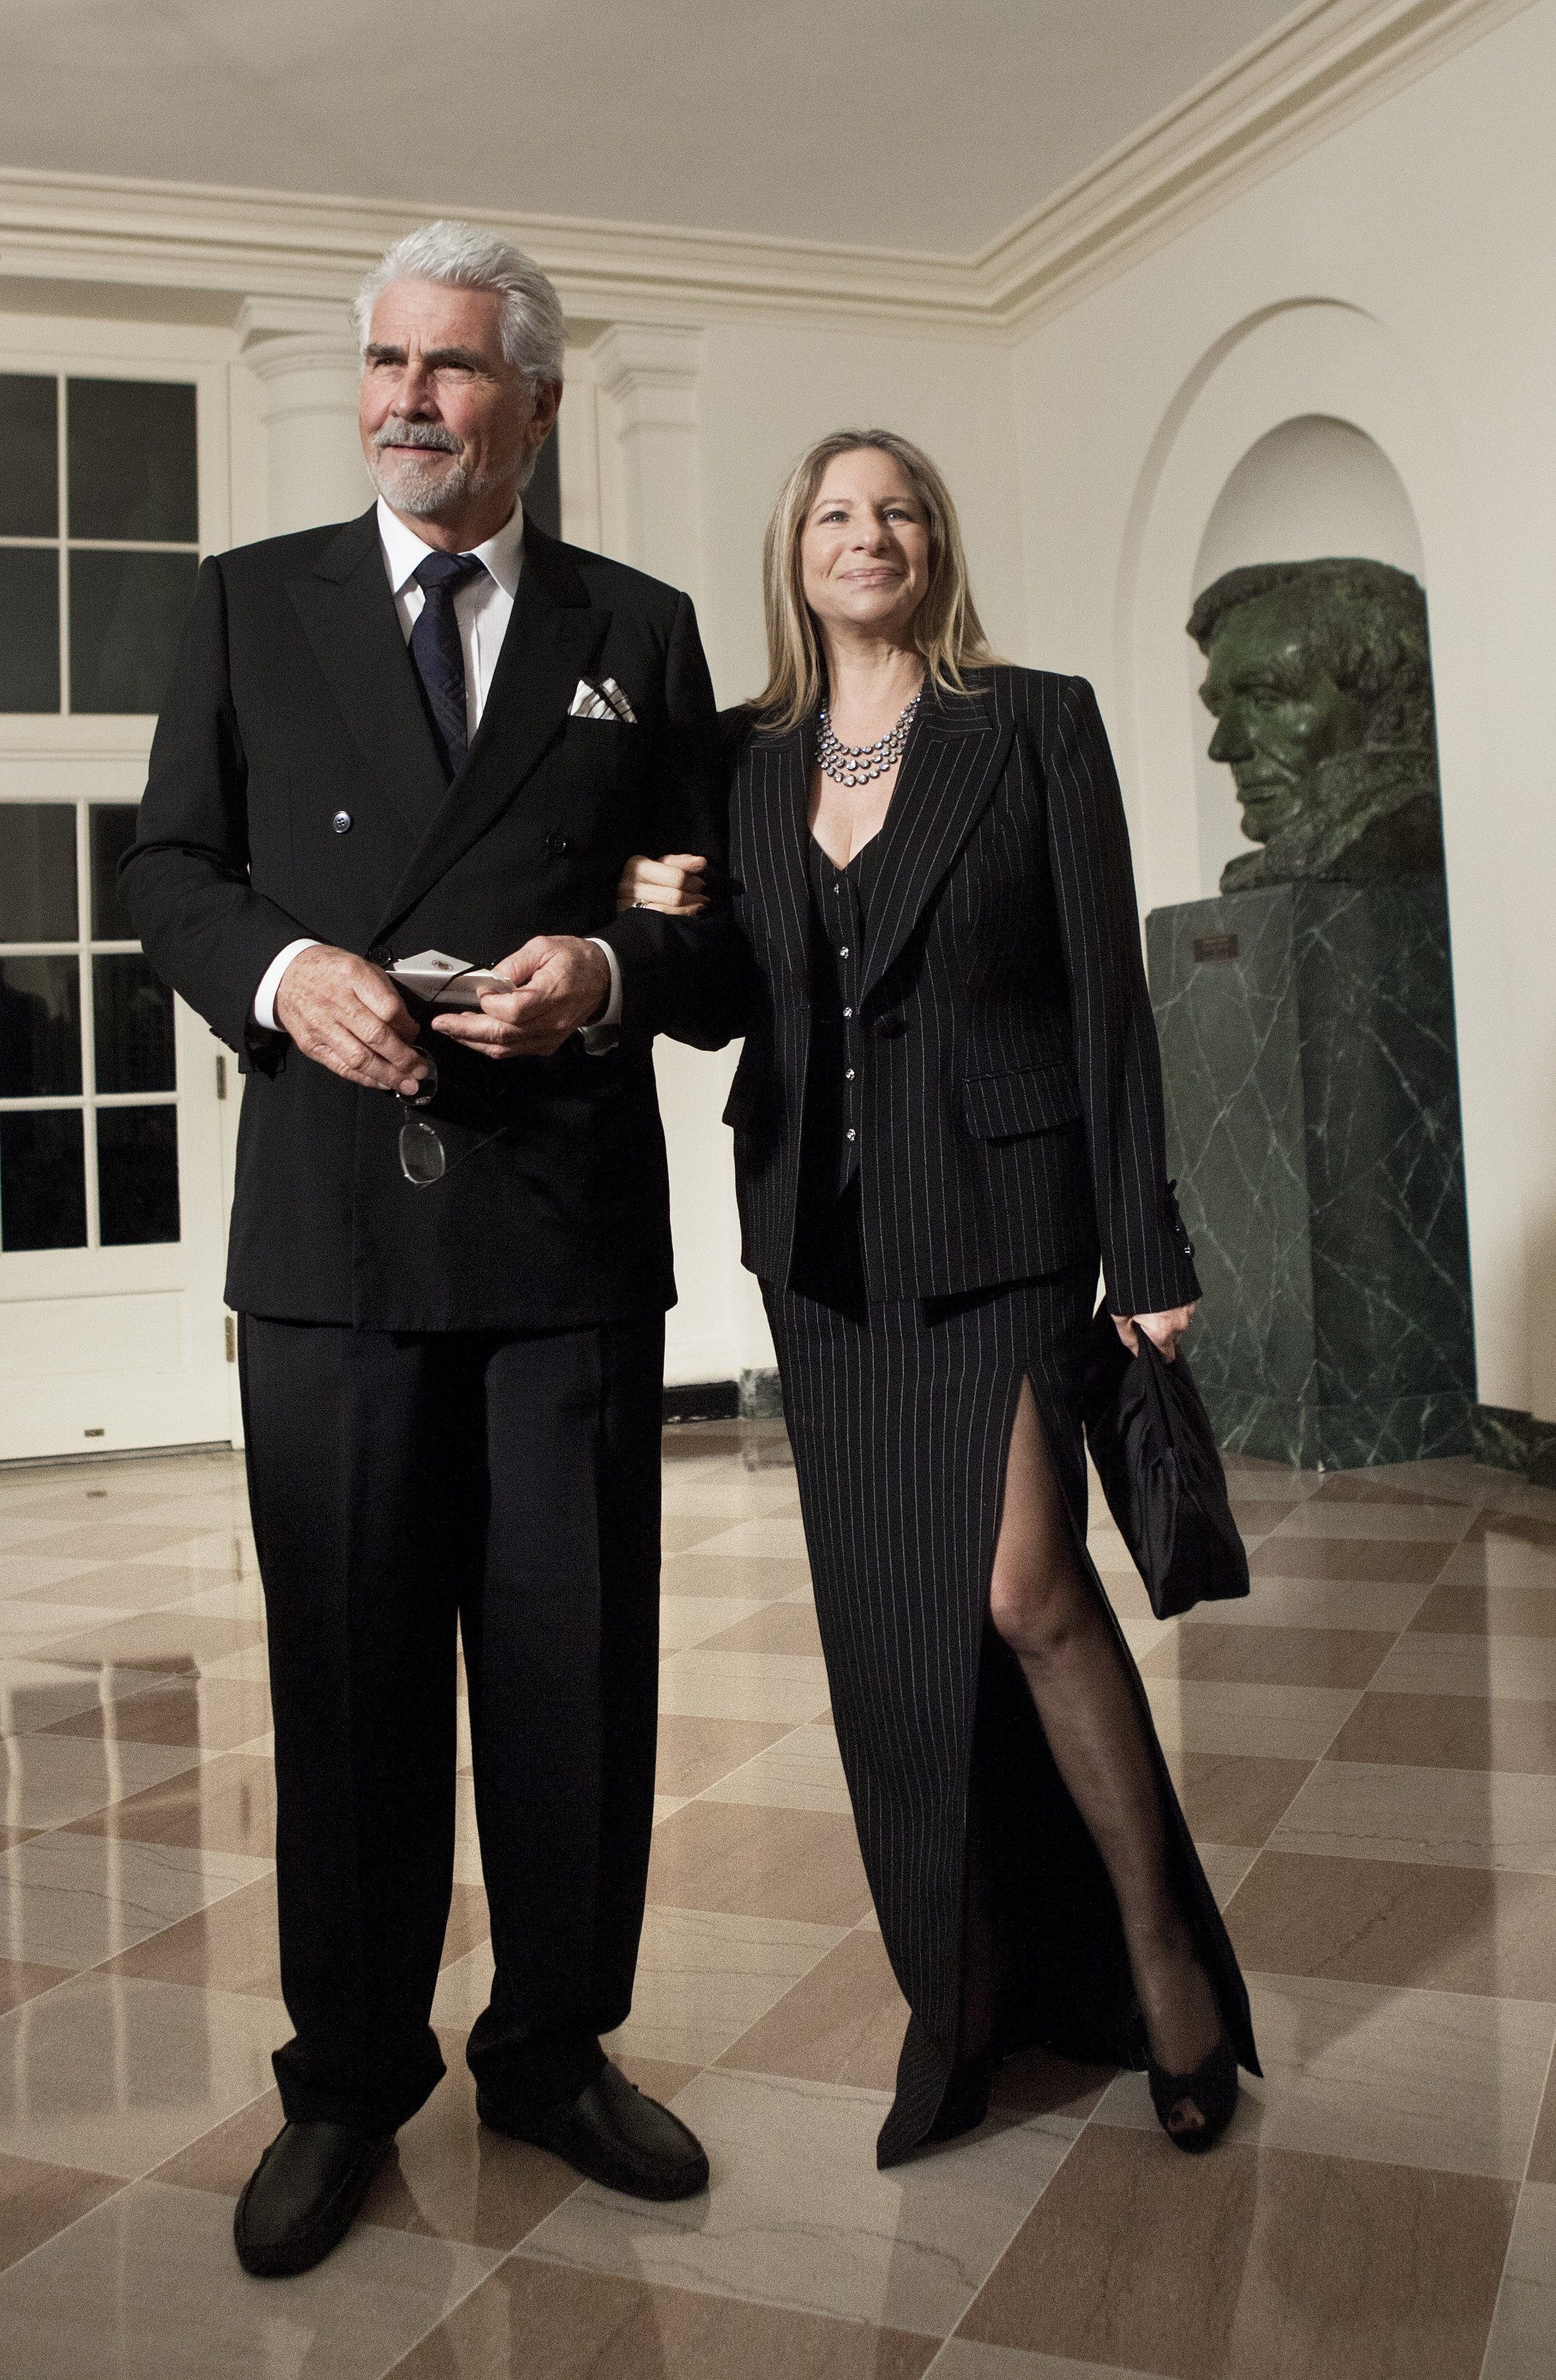 James Brolin and his wife Barbra Streisand on January 19, 2011 in Washington, D.C. | Source: Getty Images